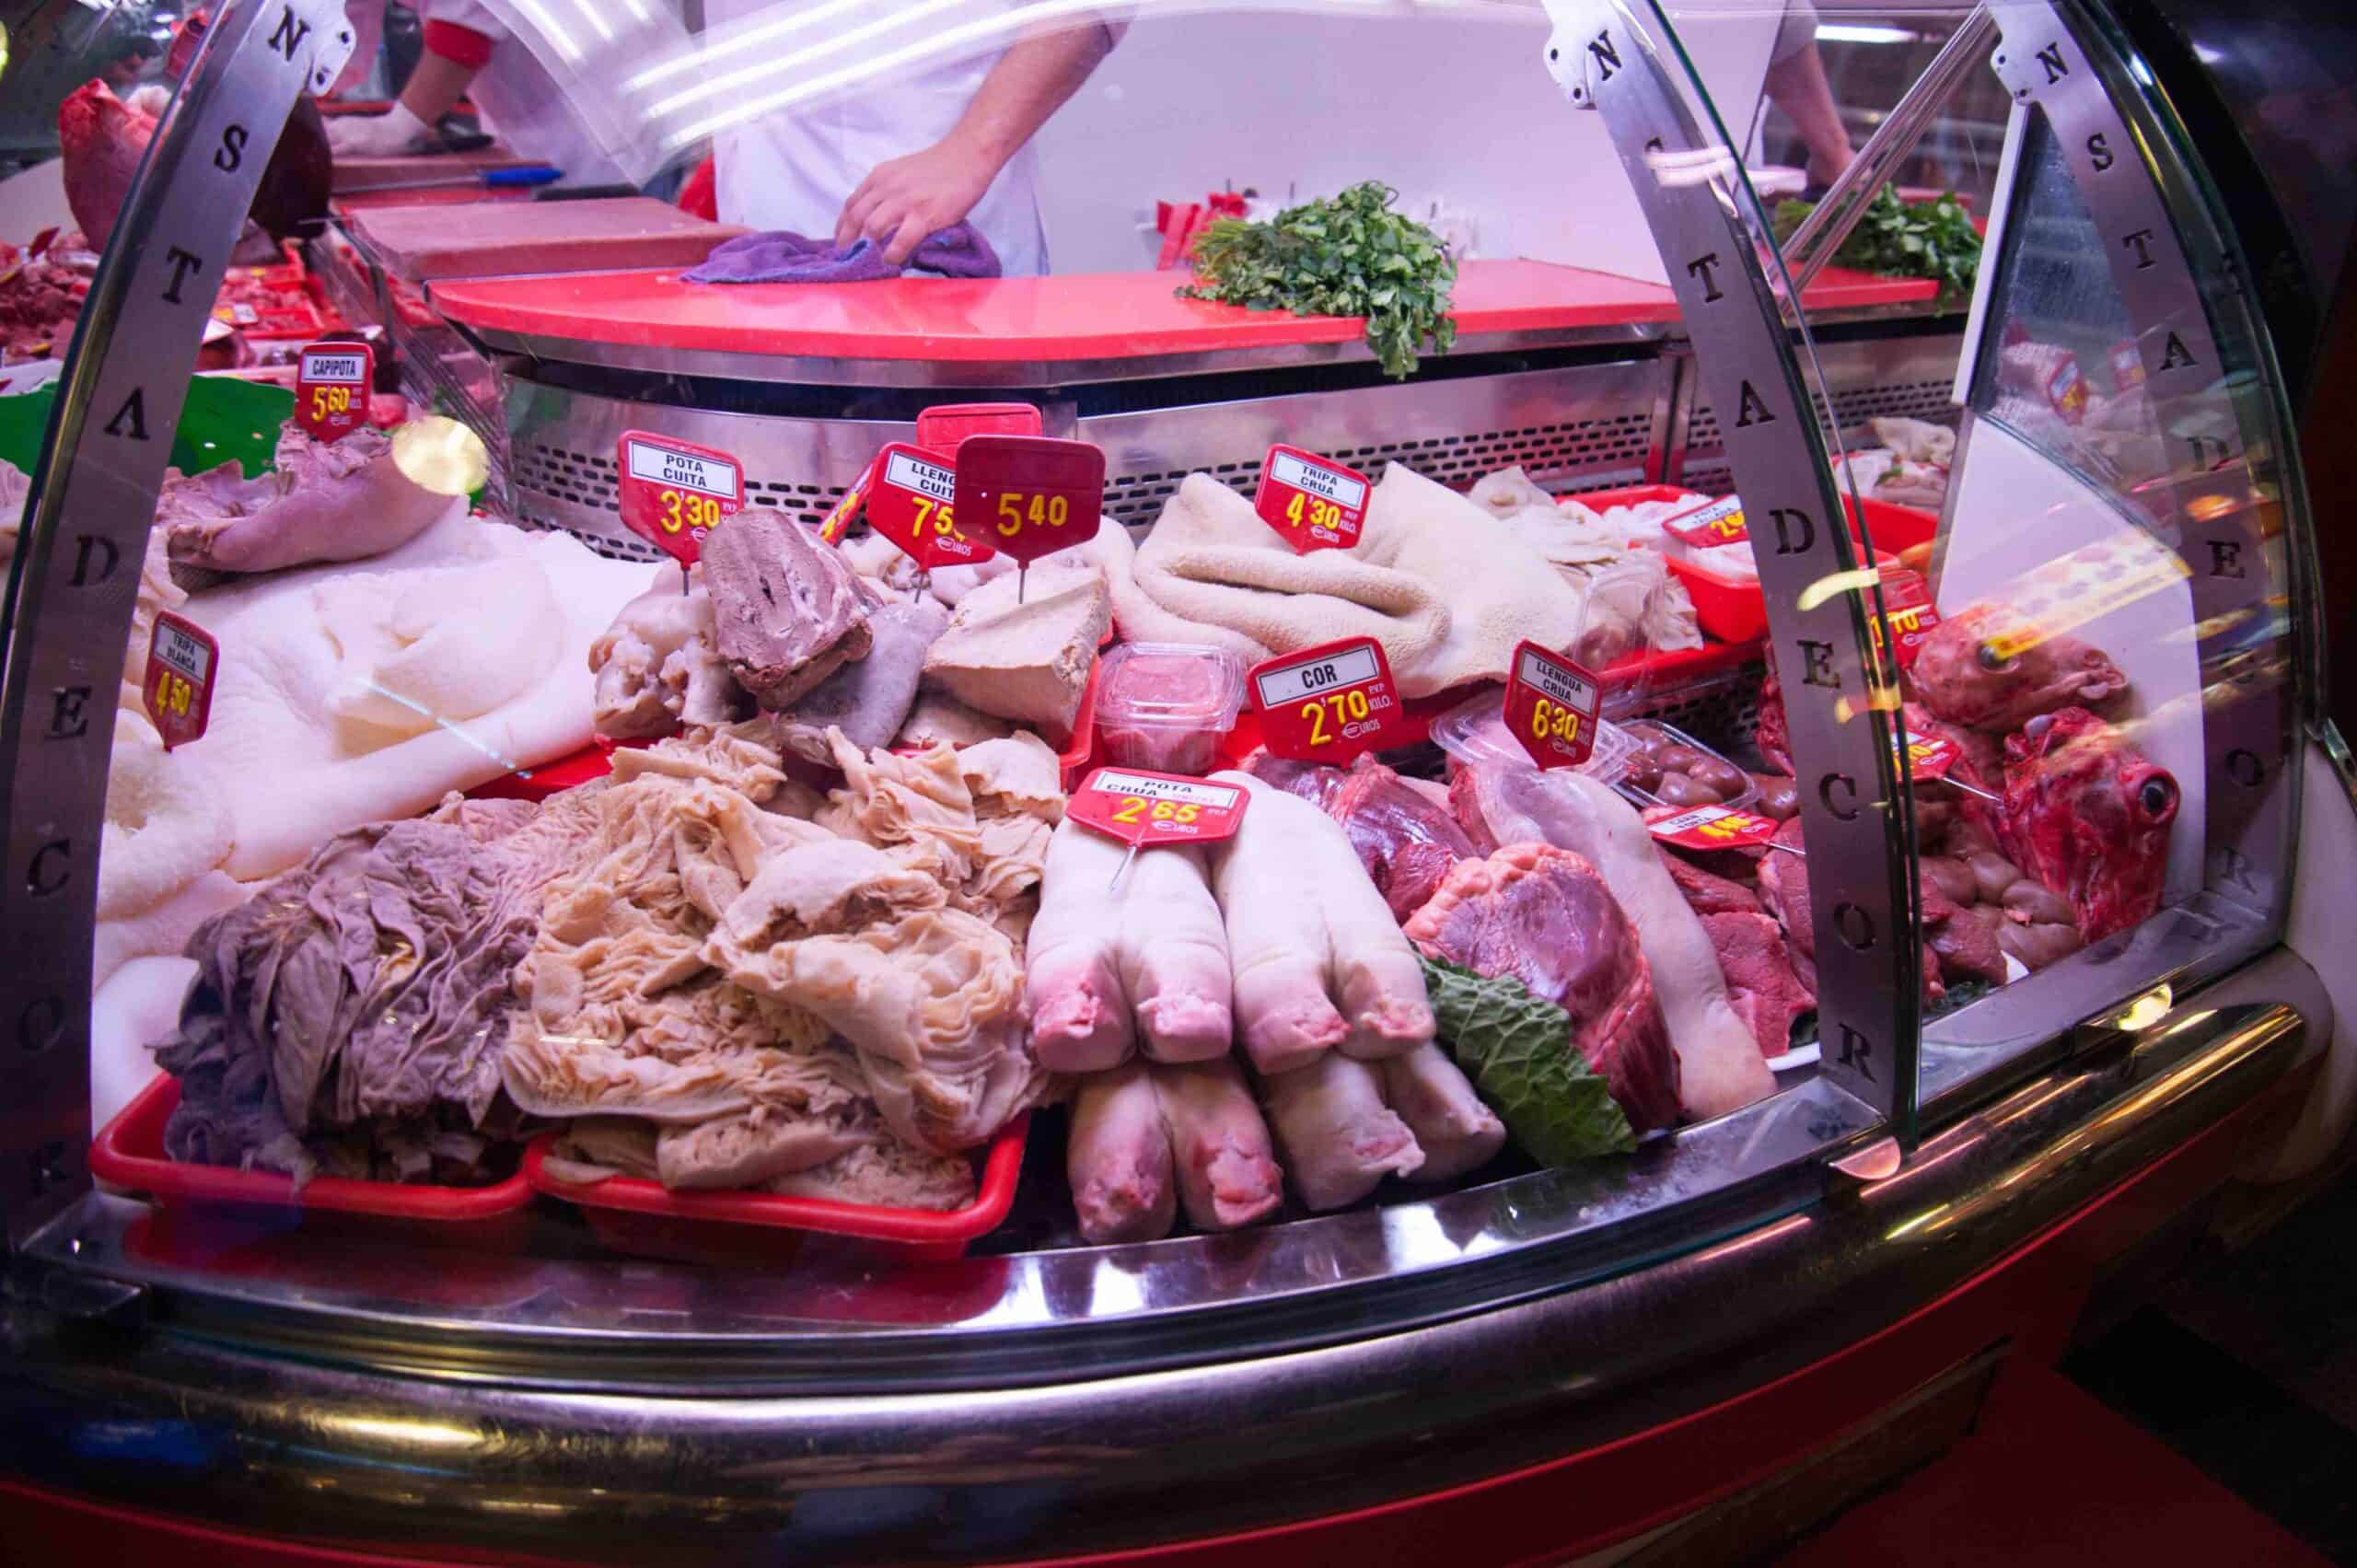 Stand with meat offal in meat market